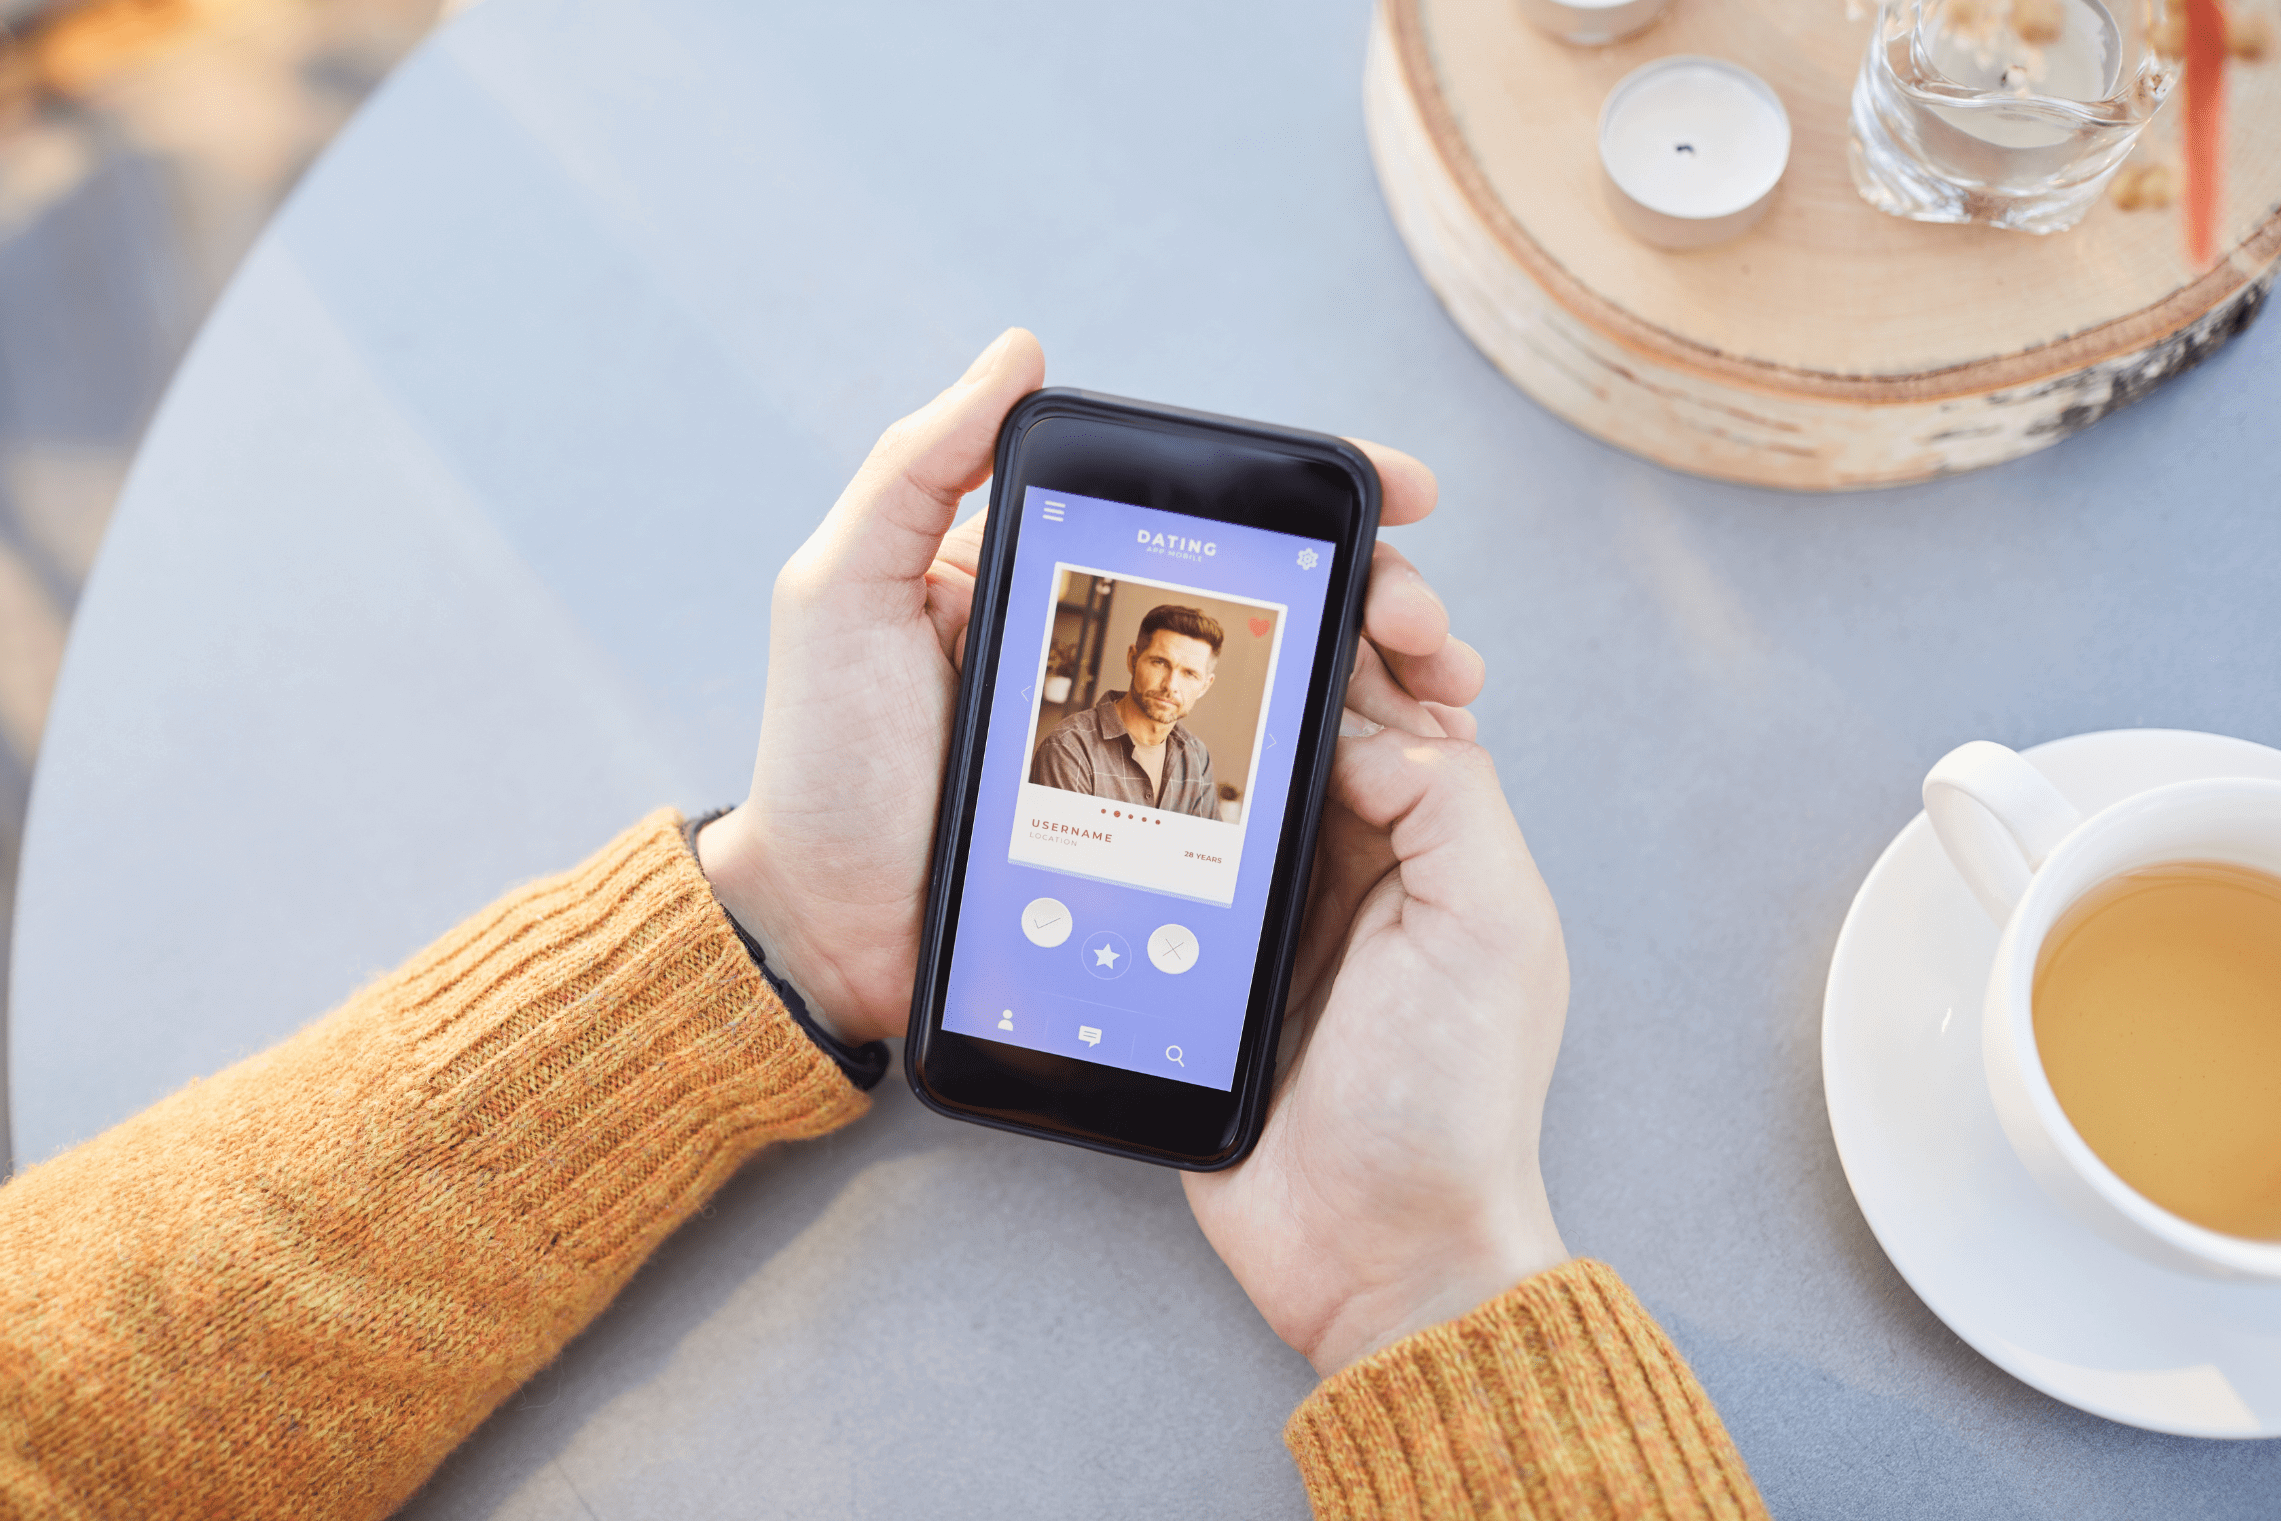 An image of a woman holding a phone with a man's dating profile on it.